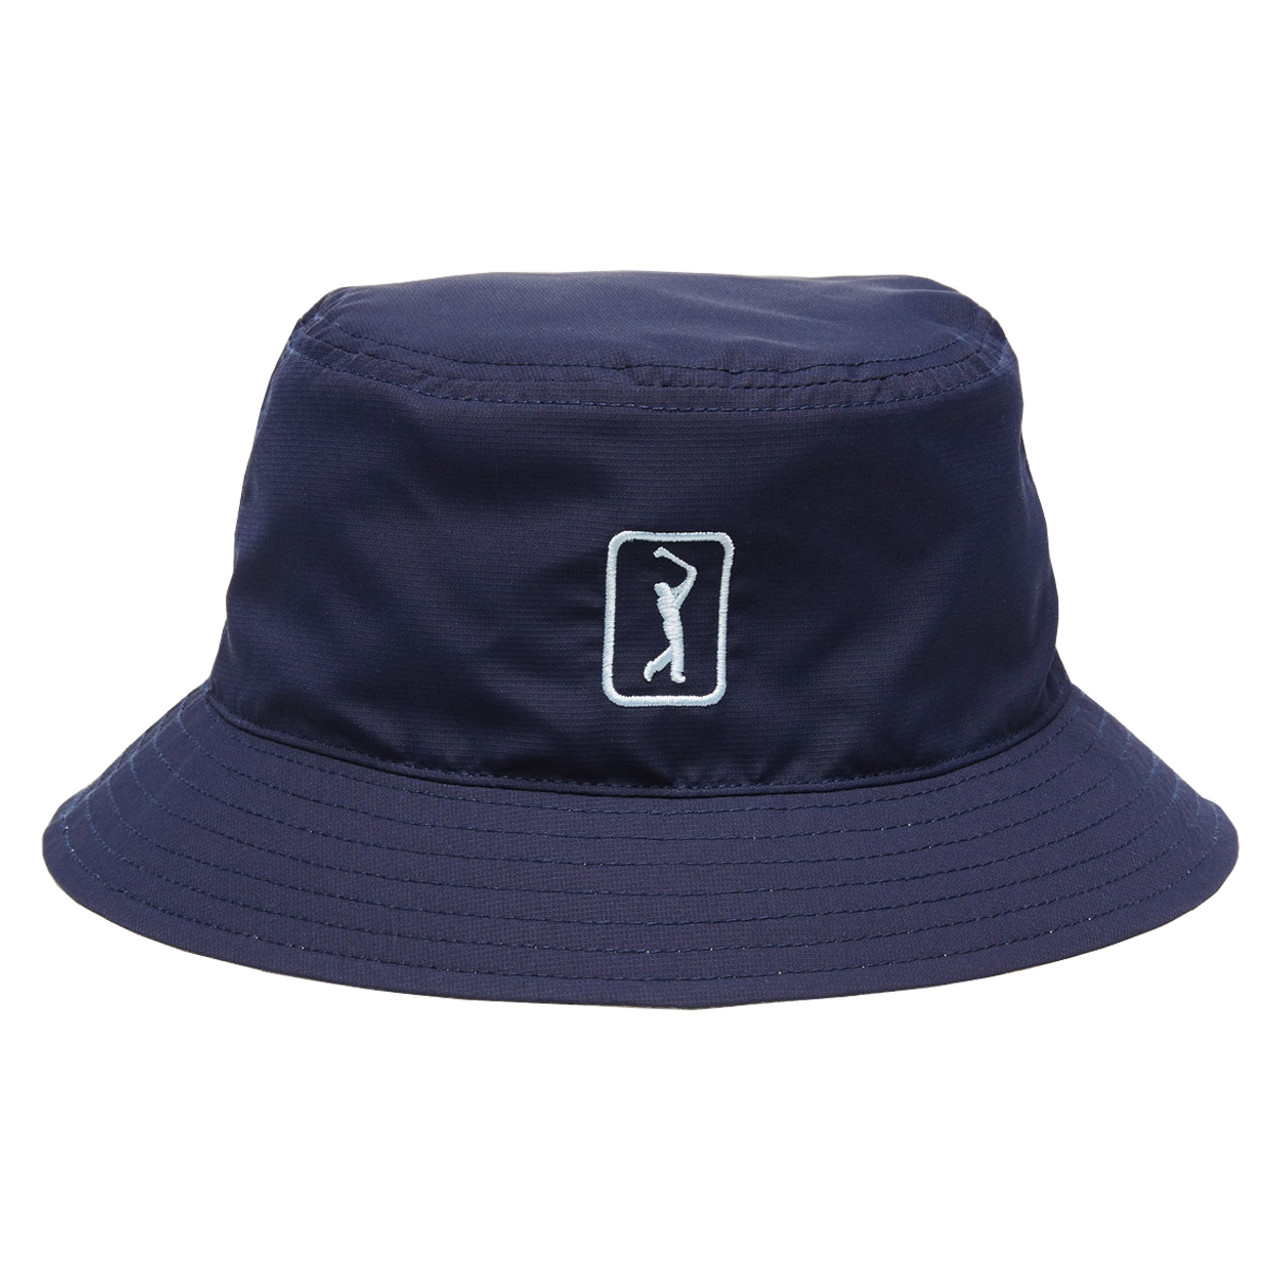 PGA Tour Reversible Bucket Hat - OSFM Fits Up To 7.5 Hat Size ...